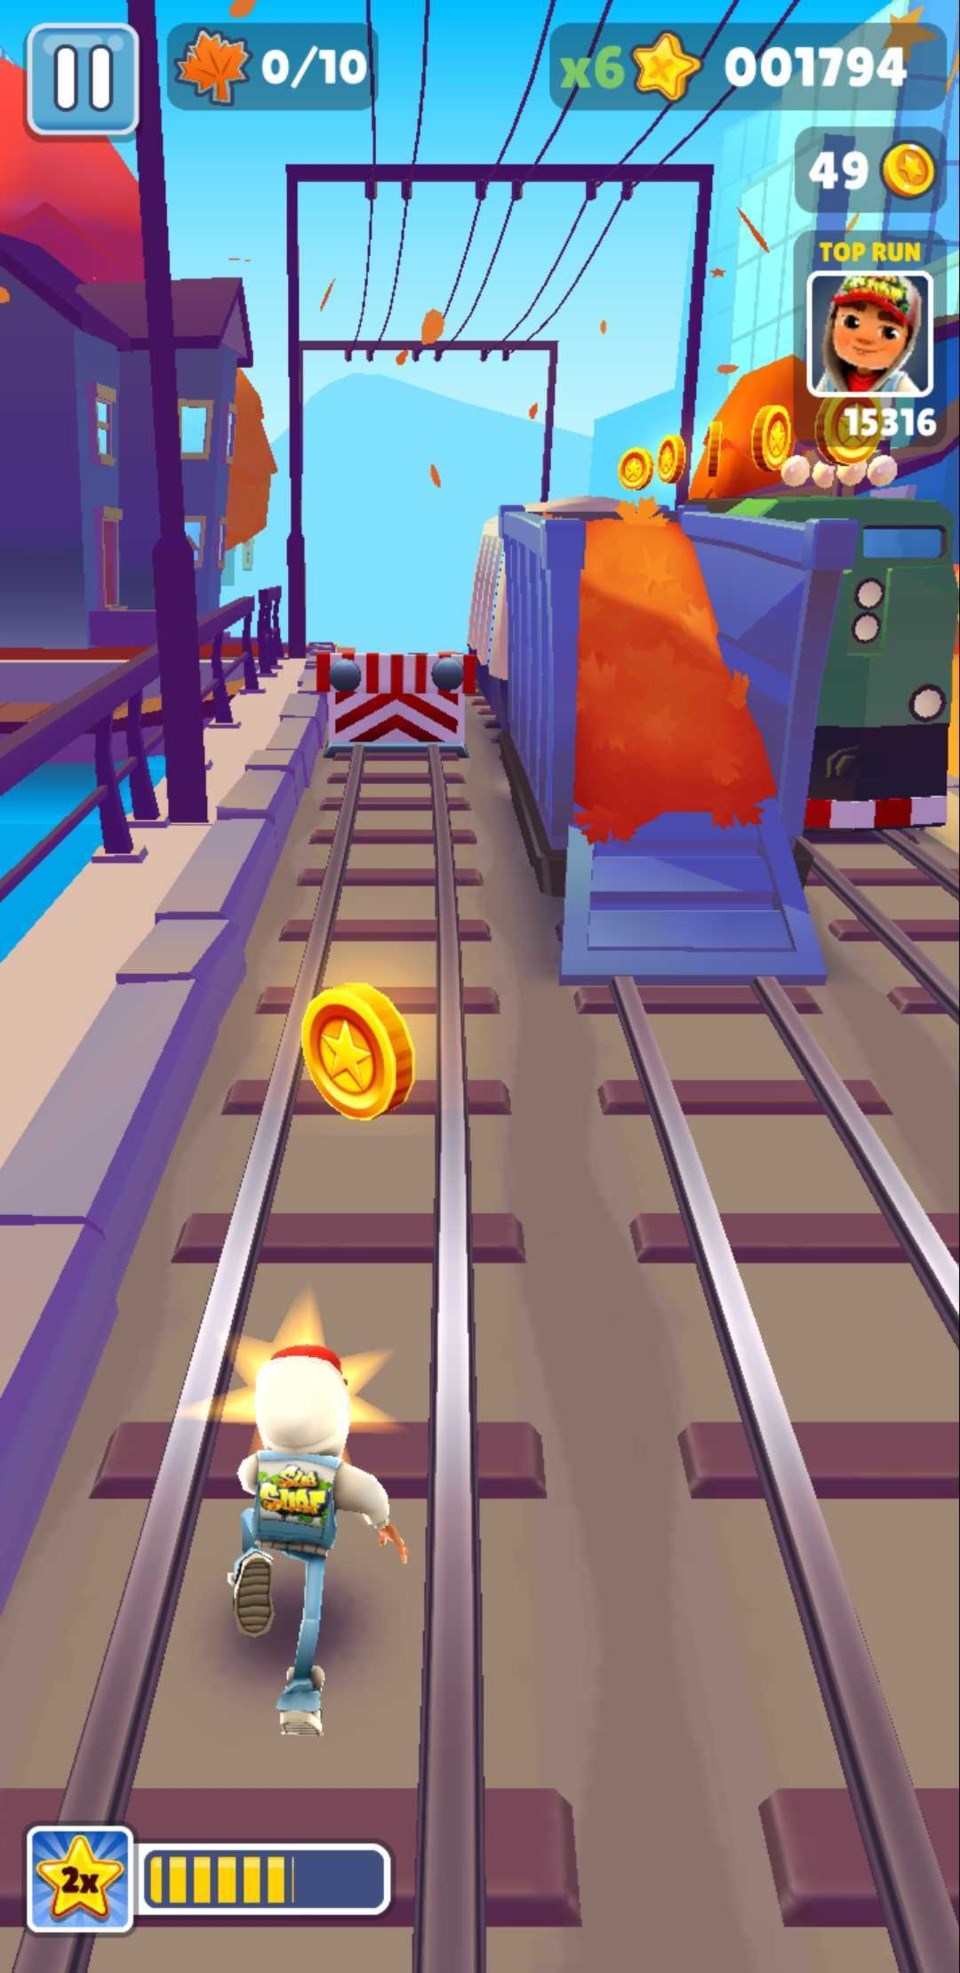 Subway Surfers moblie game features new Vancouver map Vancouver Is